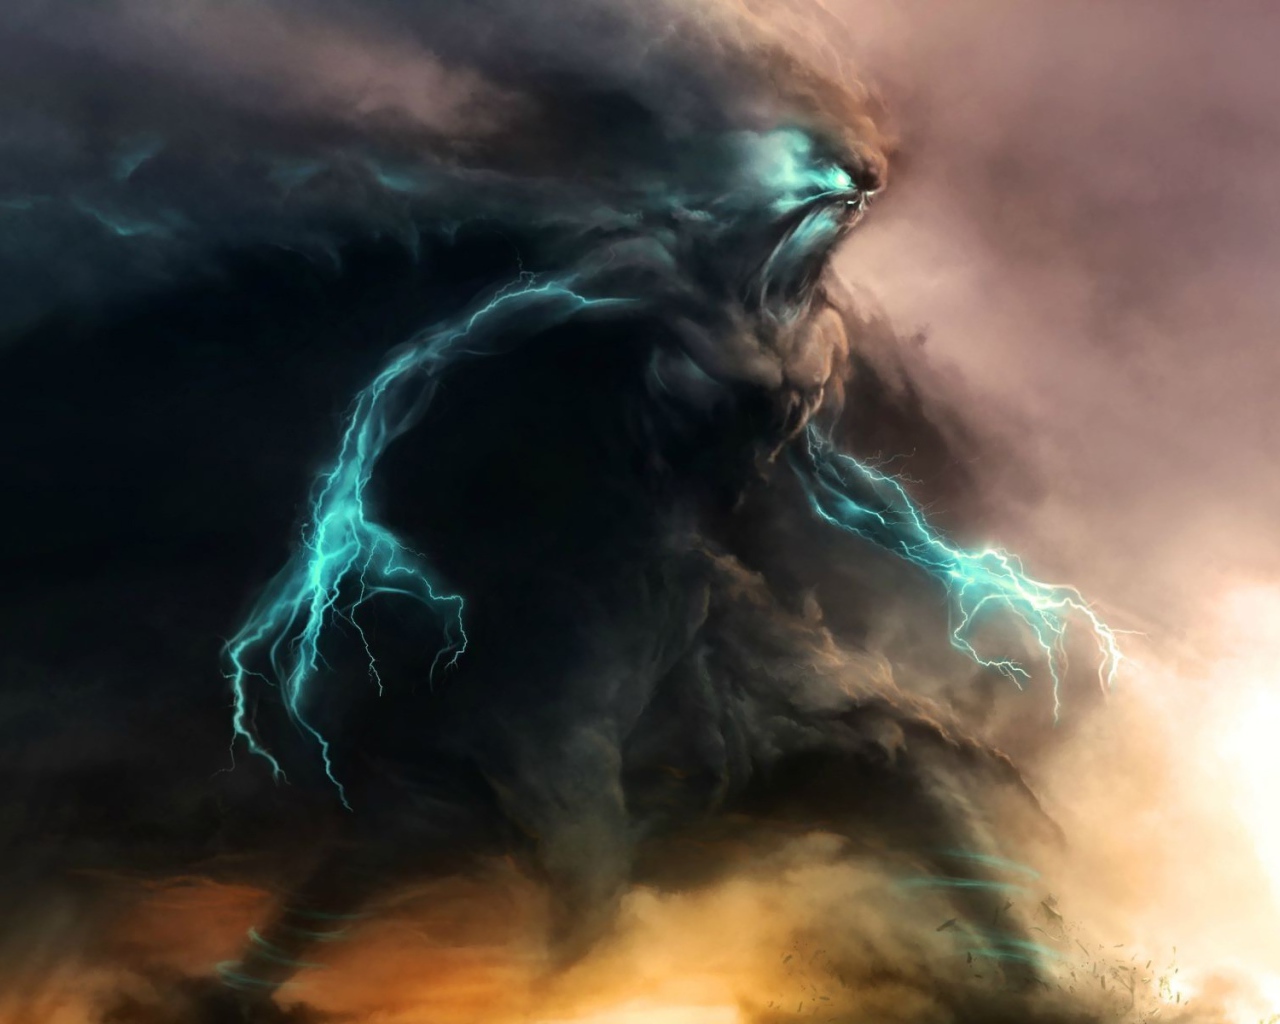 Monster from the smoke and lightning